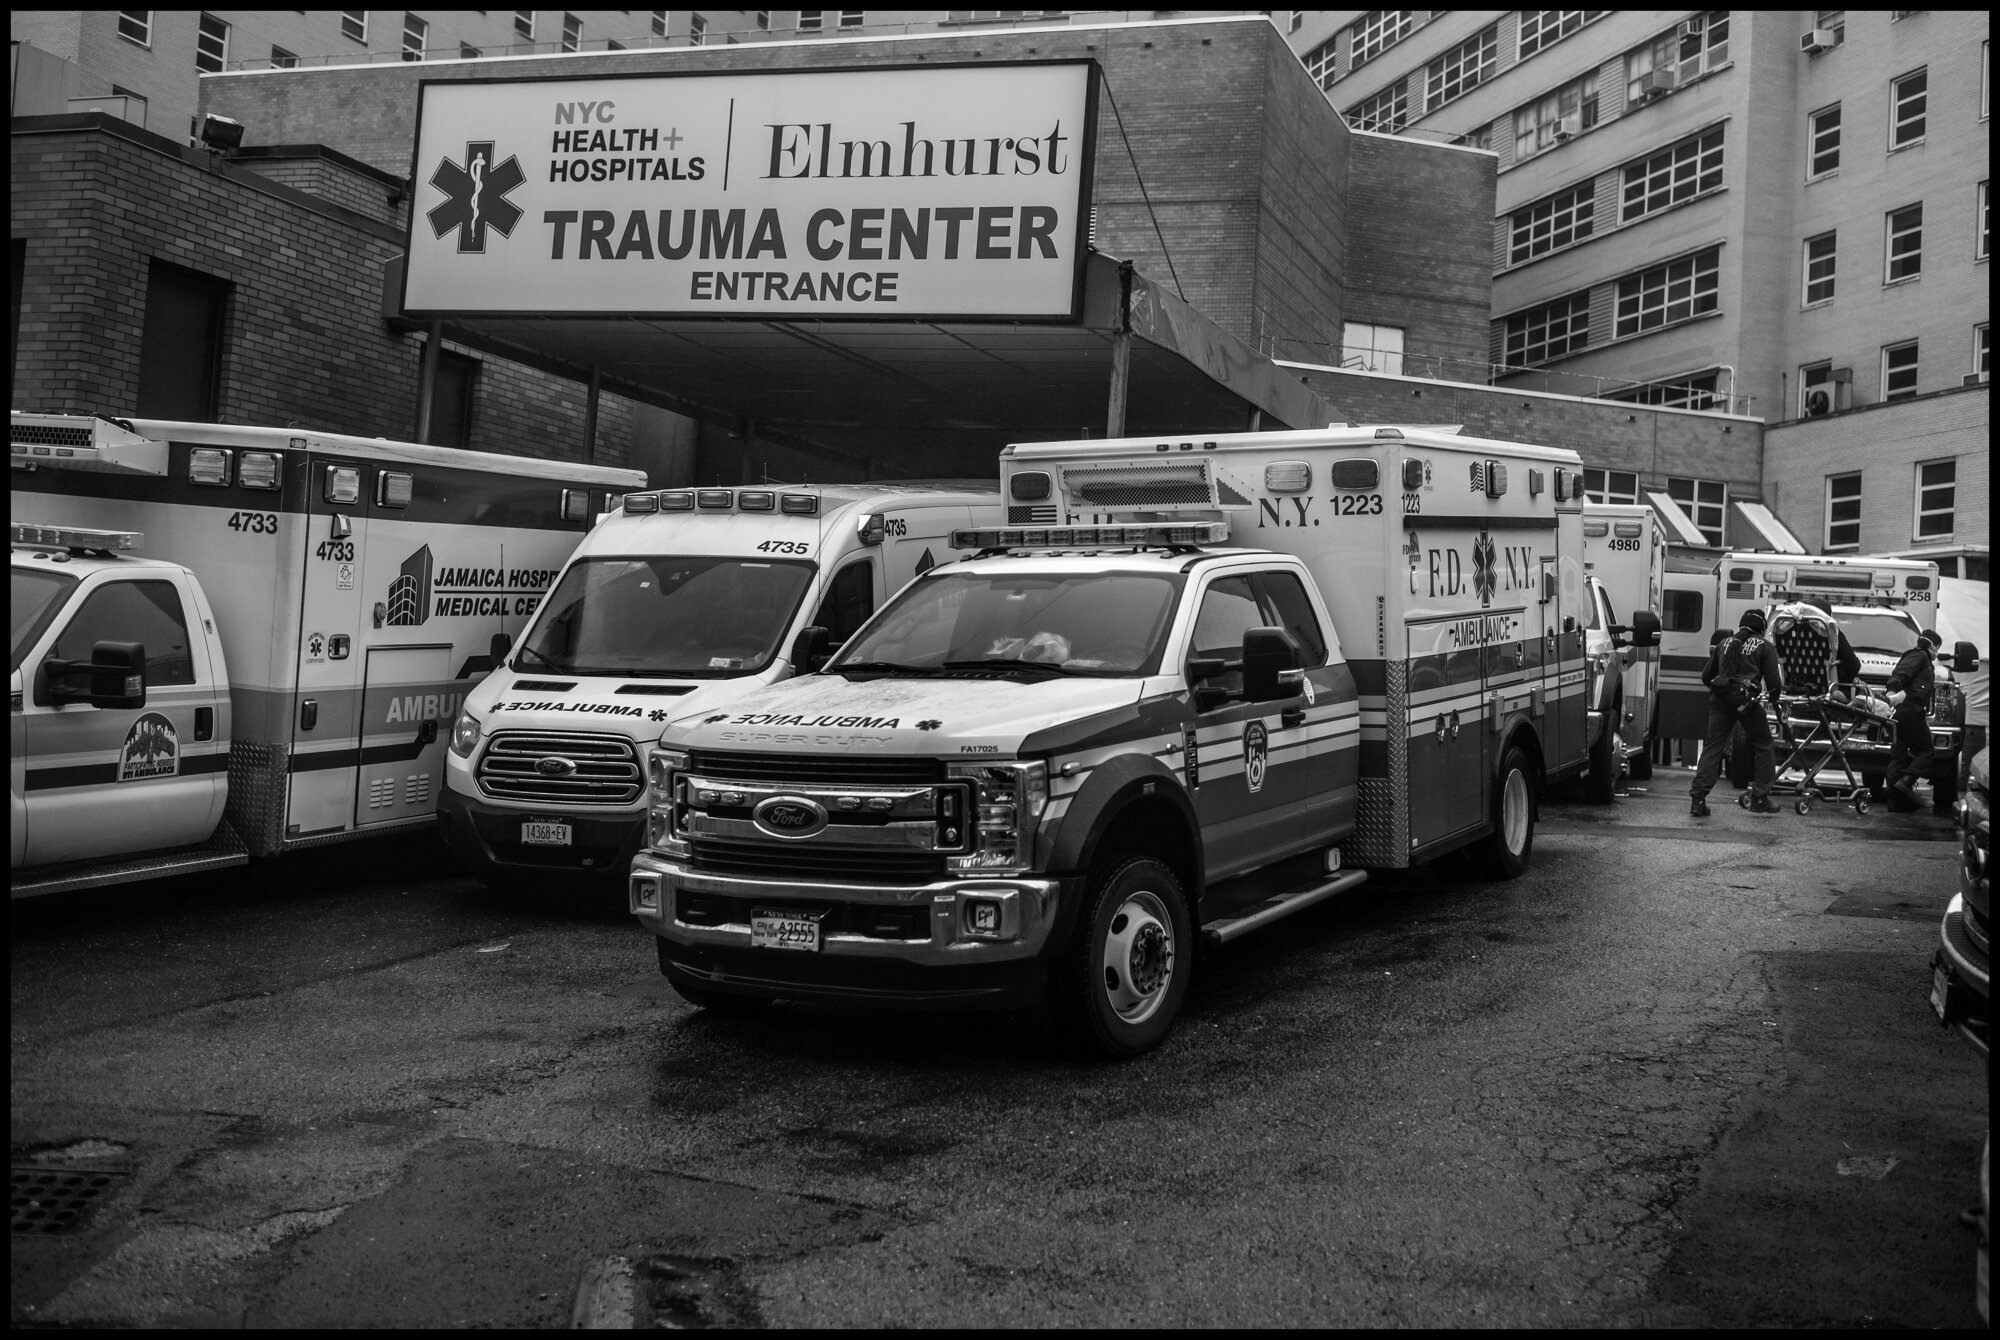  At the back of Elmhurst Hospital in Queens-the ground zero of the coronavirus crisis in New York and the United States, ambulances line up to deliver urgent care patients to the emergency room.   March 29, 2020. ©Peter Turnley.   ID# 09-013 